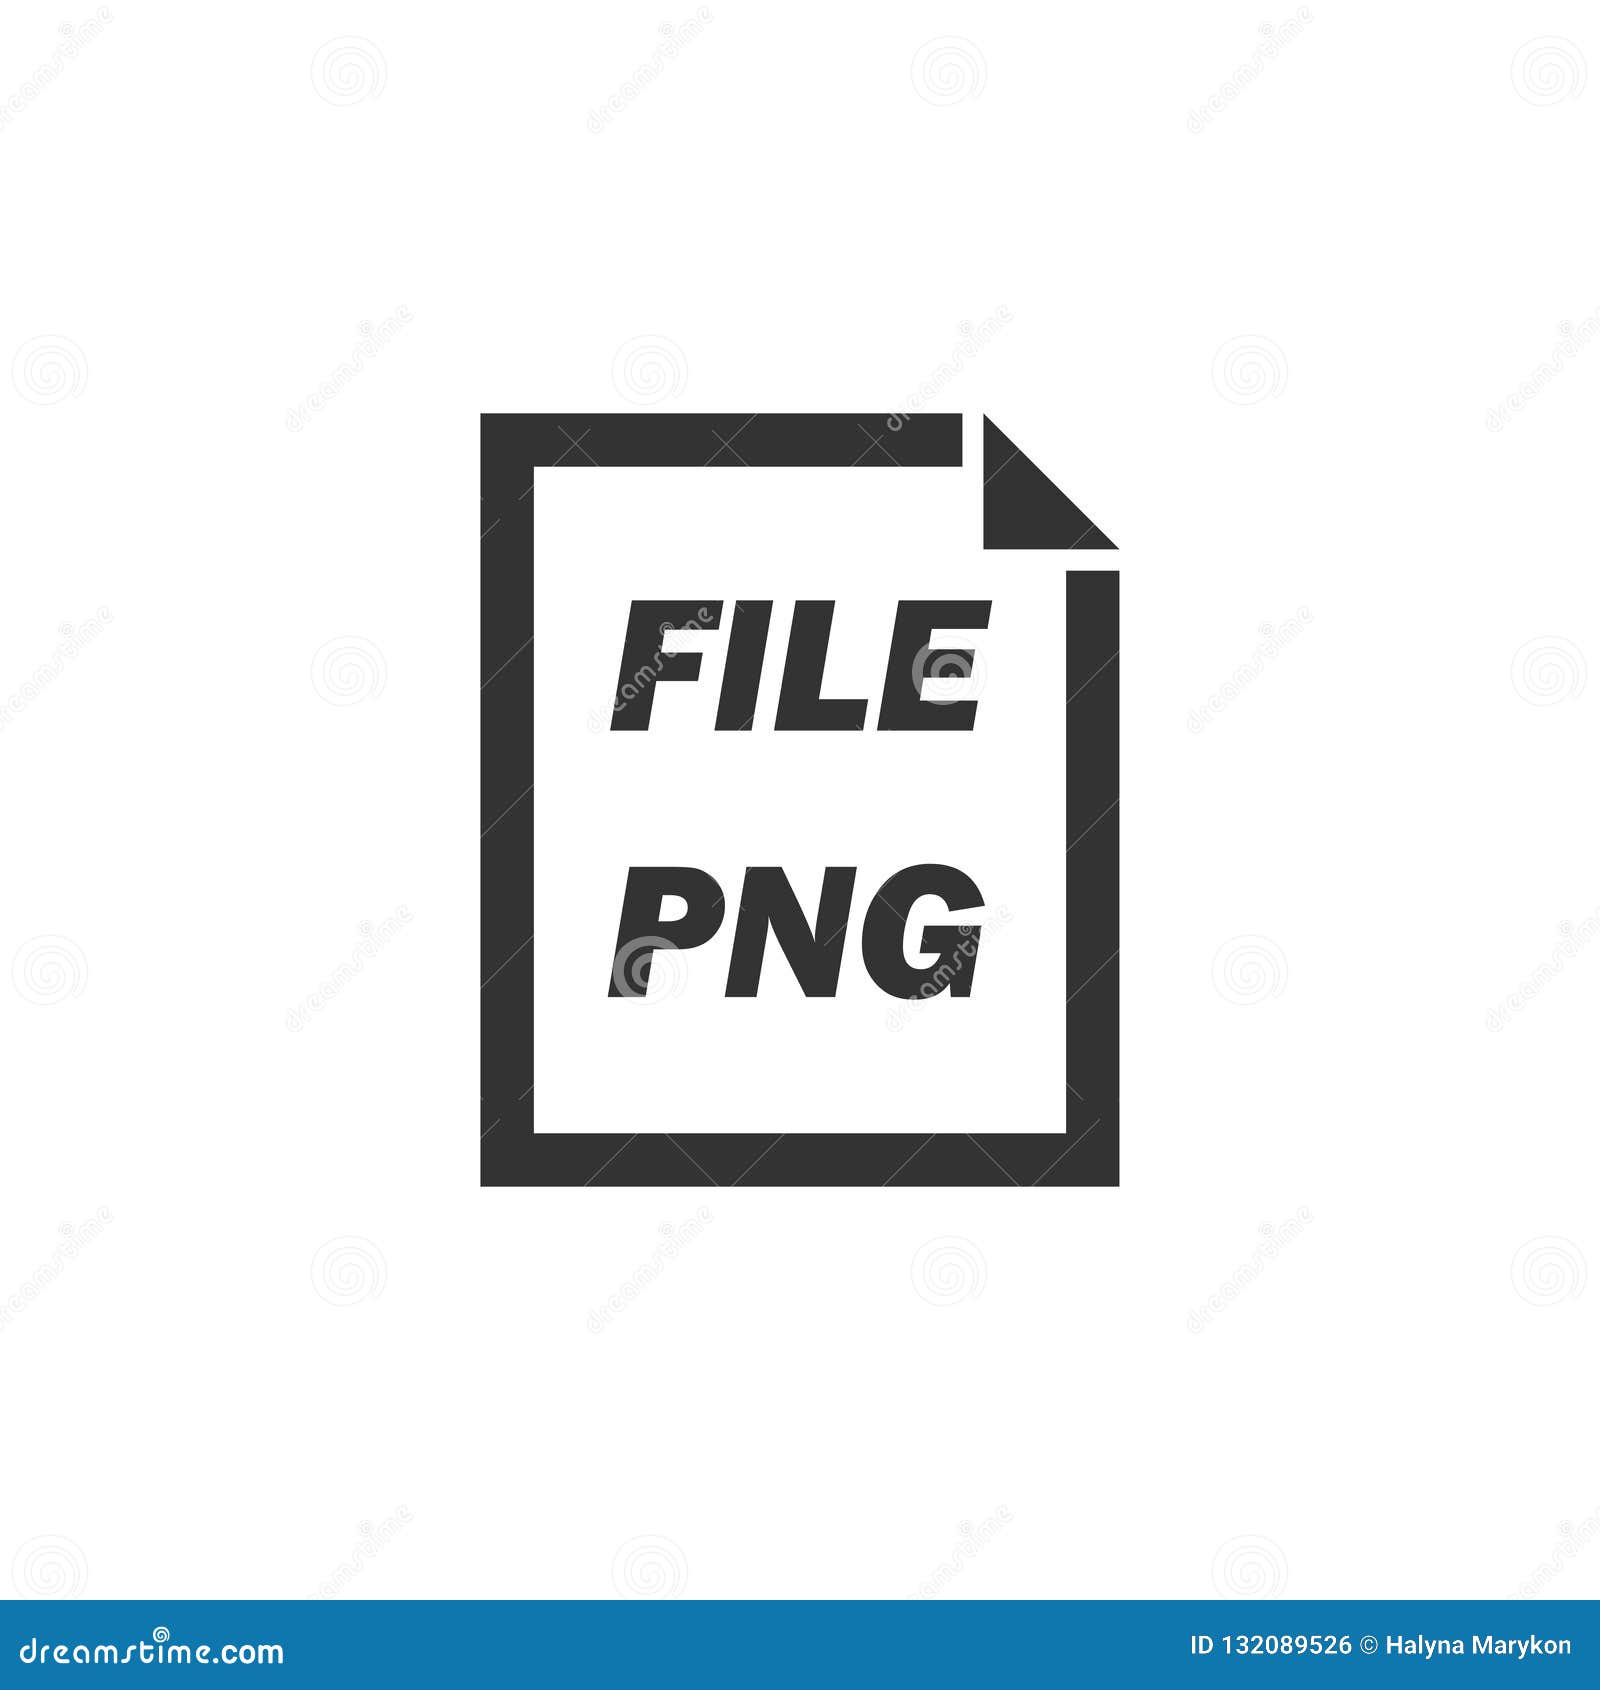 PNG File icon flat stock vector. Illustration of colorful - 132089526